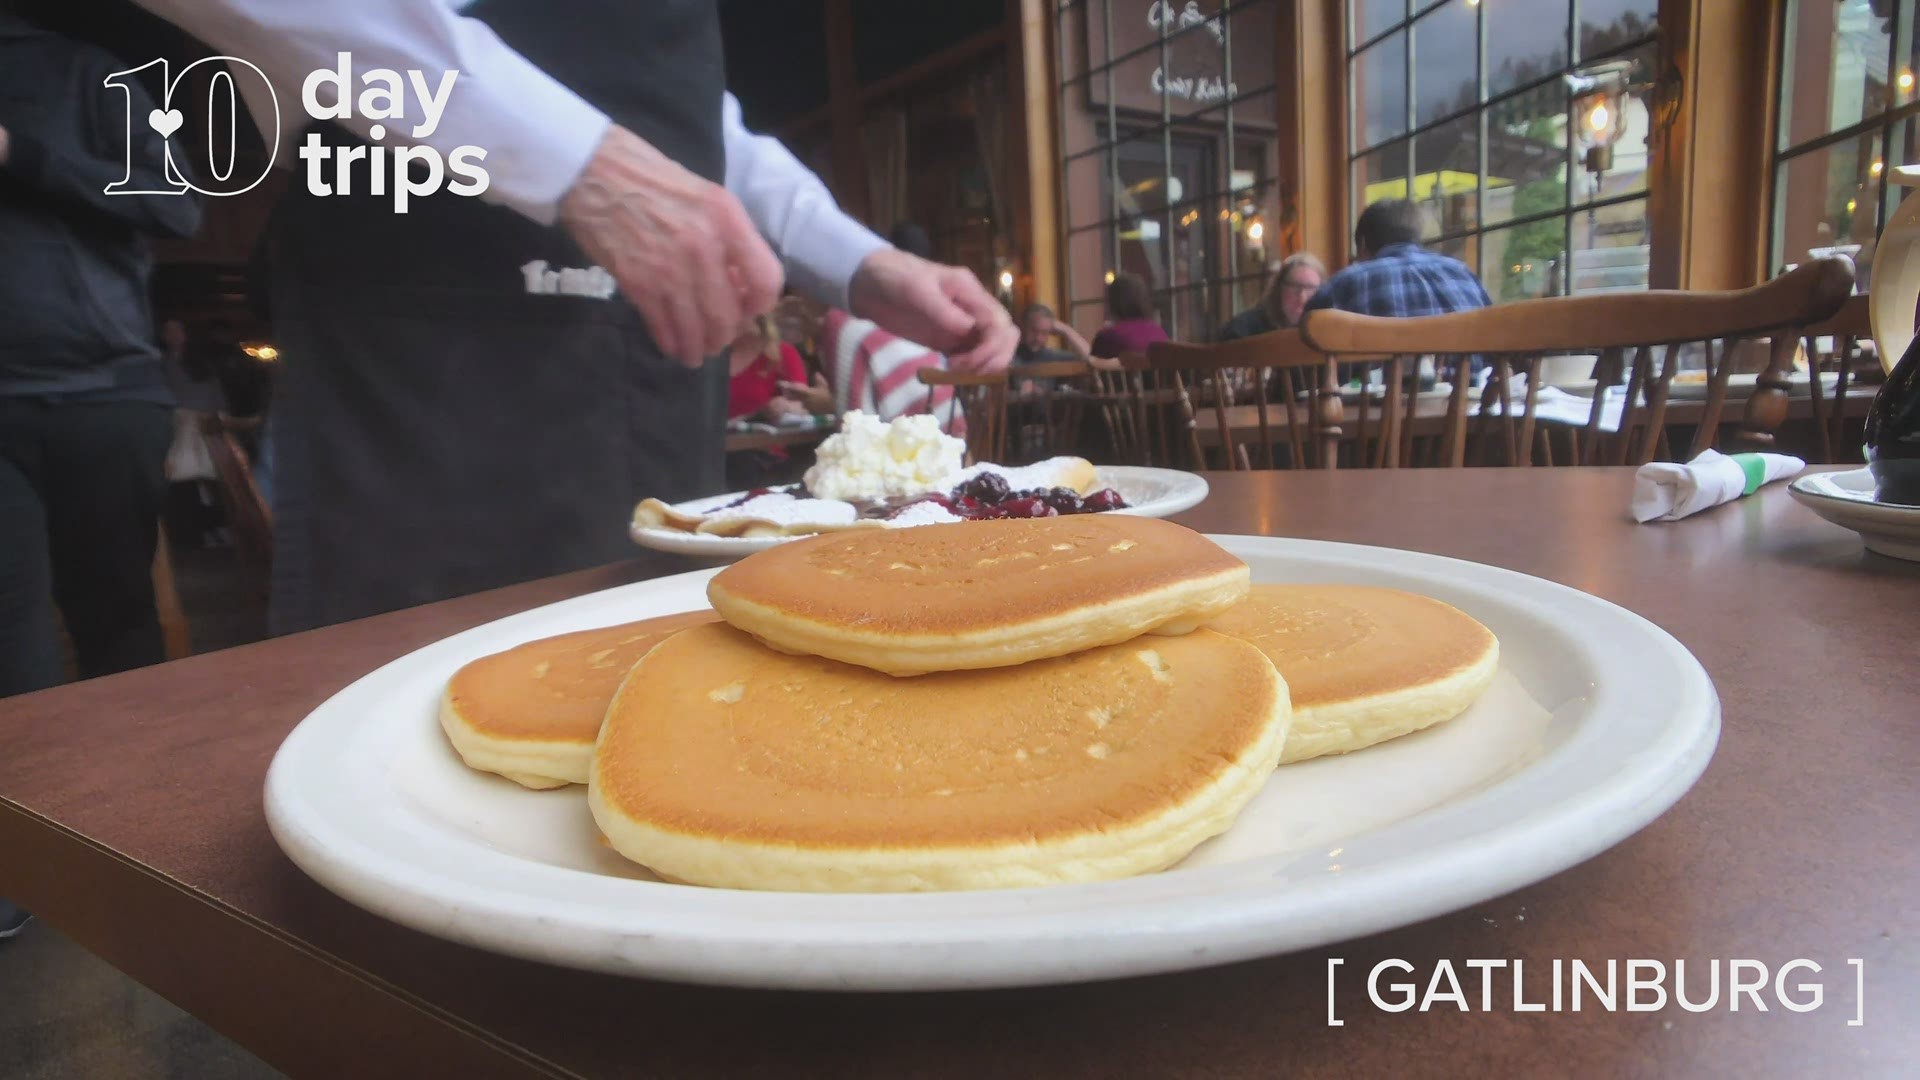 Hit up the first pancake house in Tennessee and try sweet potato pancakes.